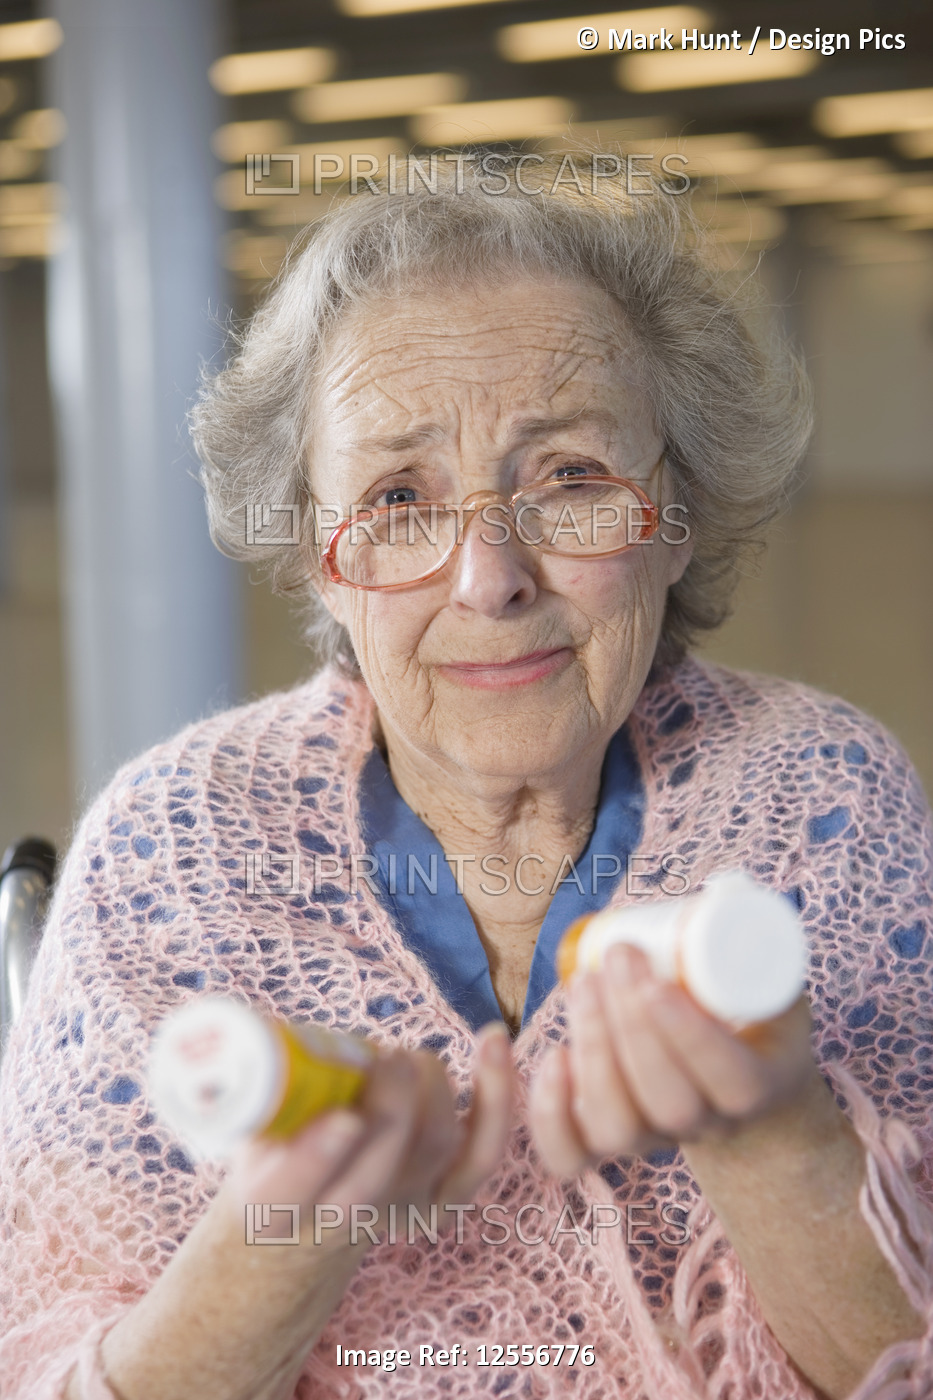 View of a senior woman holding medicines in hands.